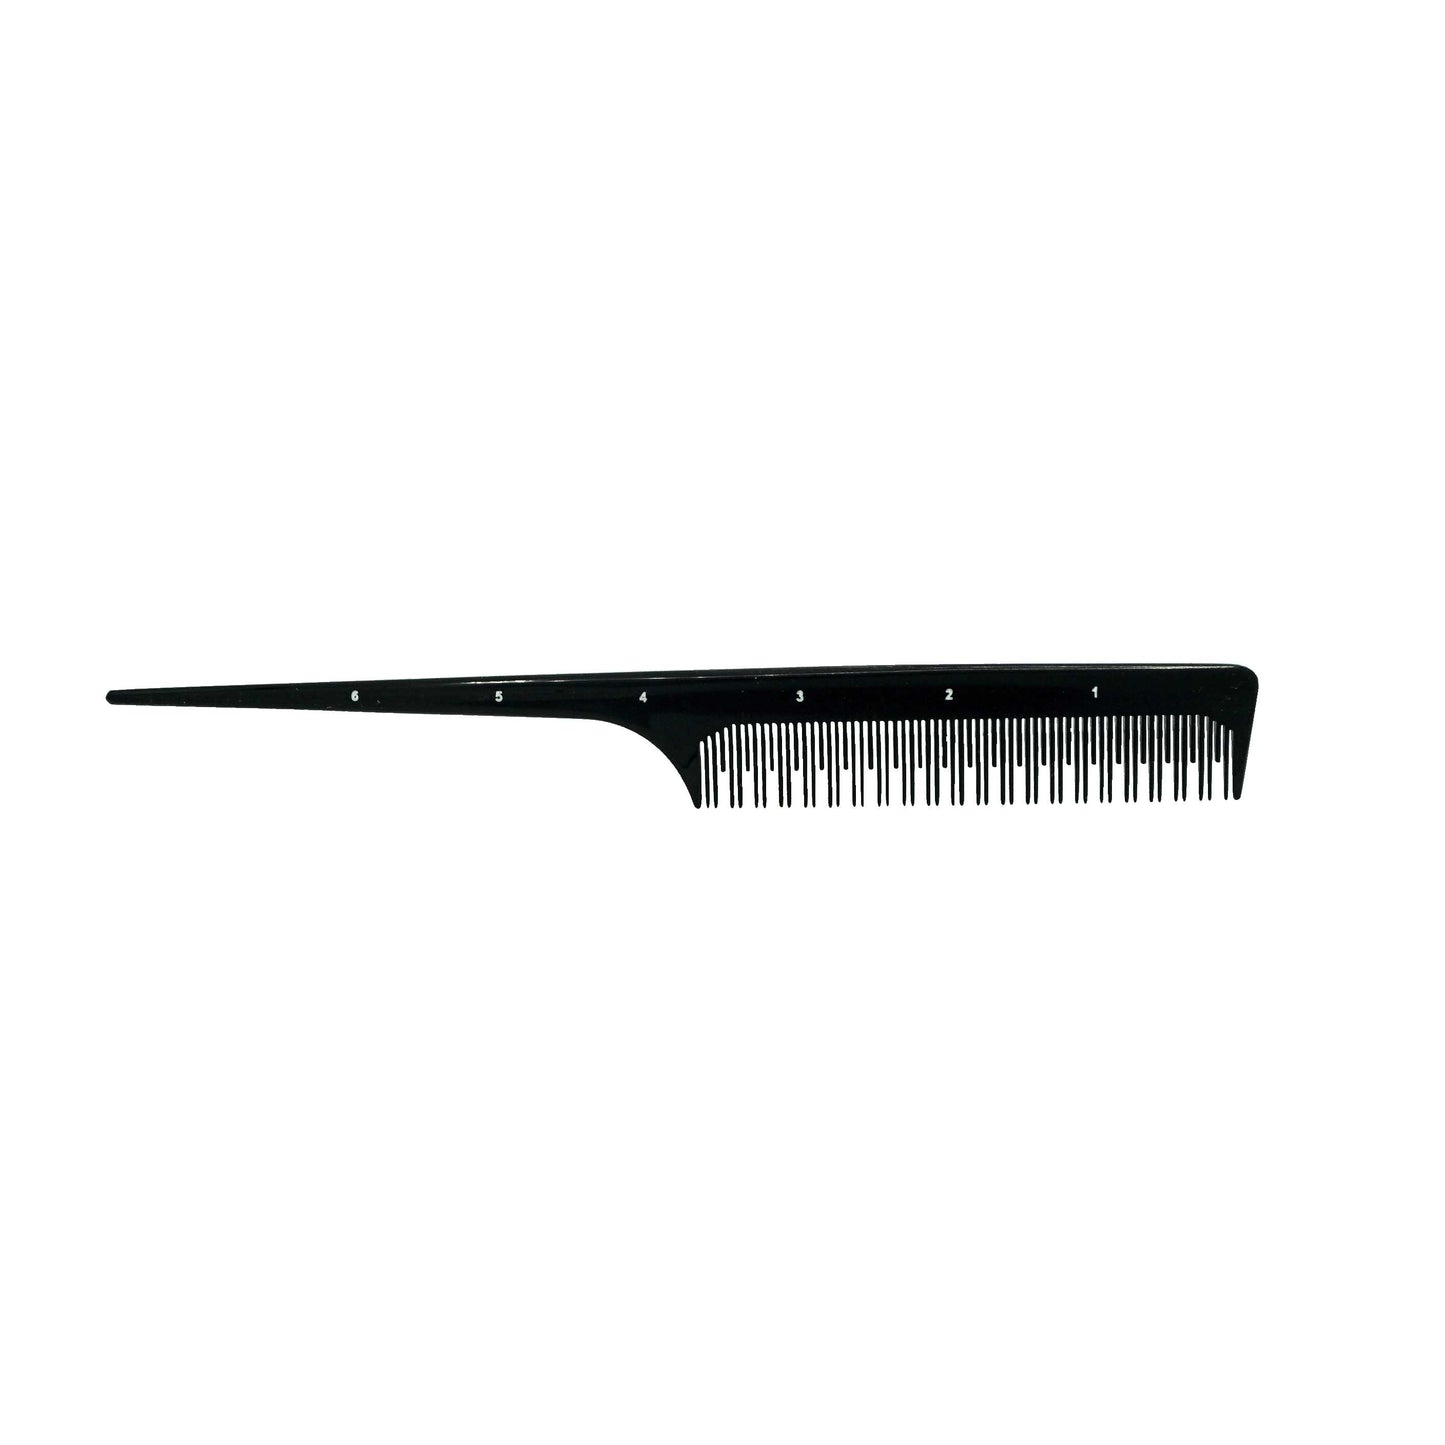 Pegasus 104, 8in Hard Rubber Rat Tail Tease Comb, Handmade, Seamless, Smooth Edges, Anti Static, Heat and Chemically Resistant, Great for Parting, Coloring Hair | Peines de goma dura - Black